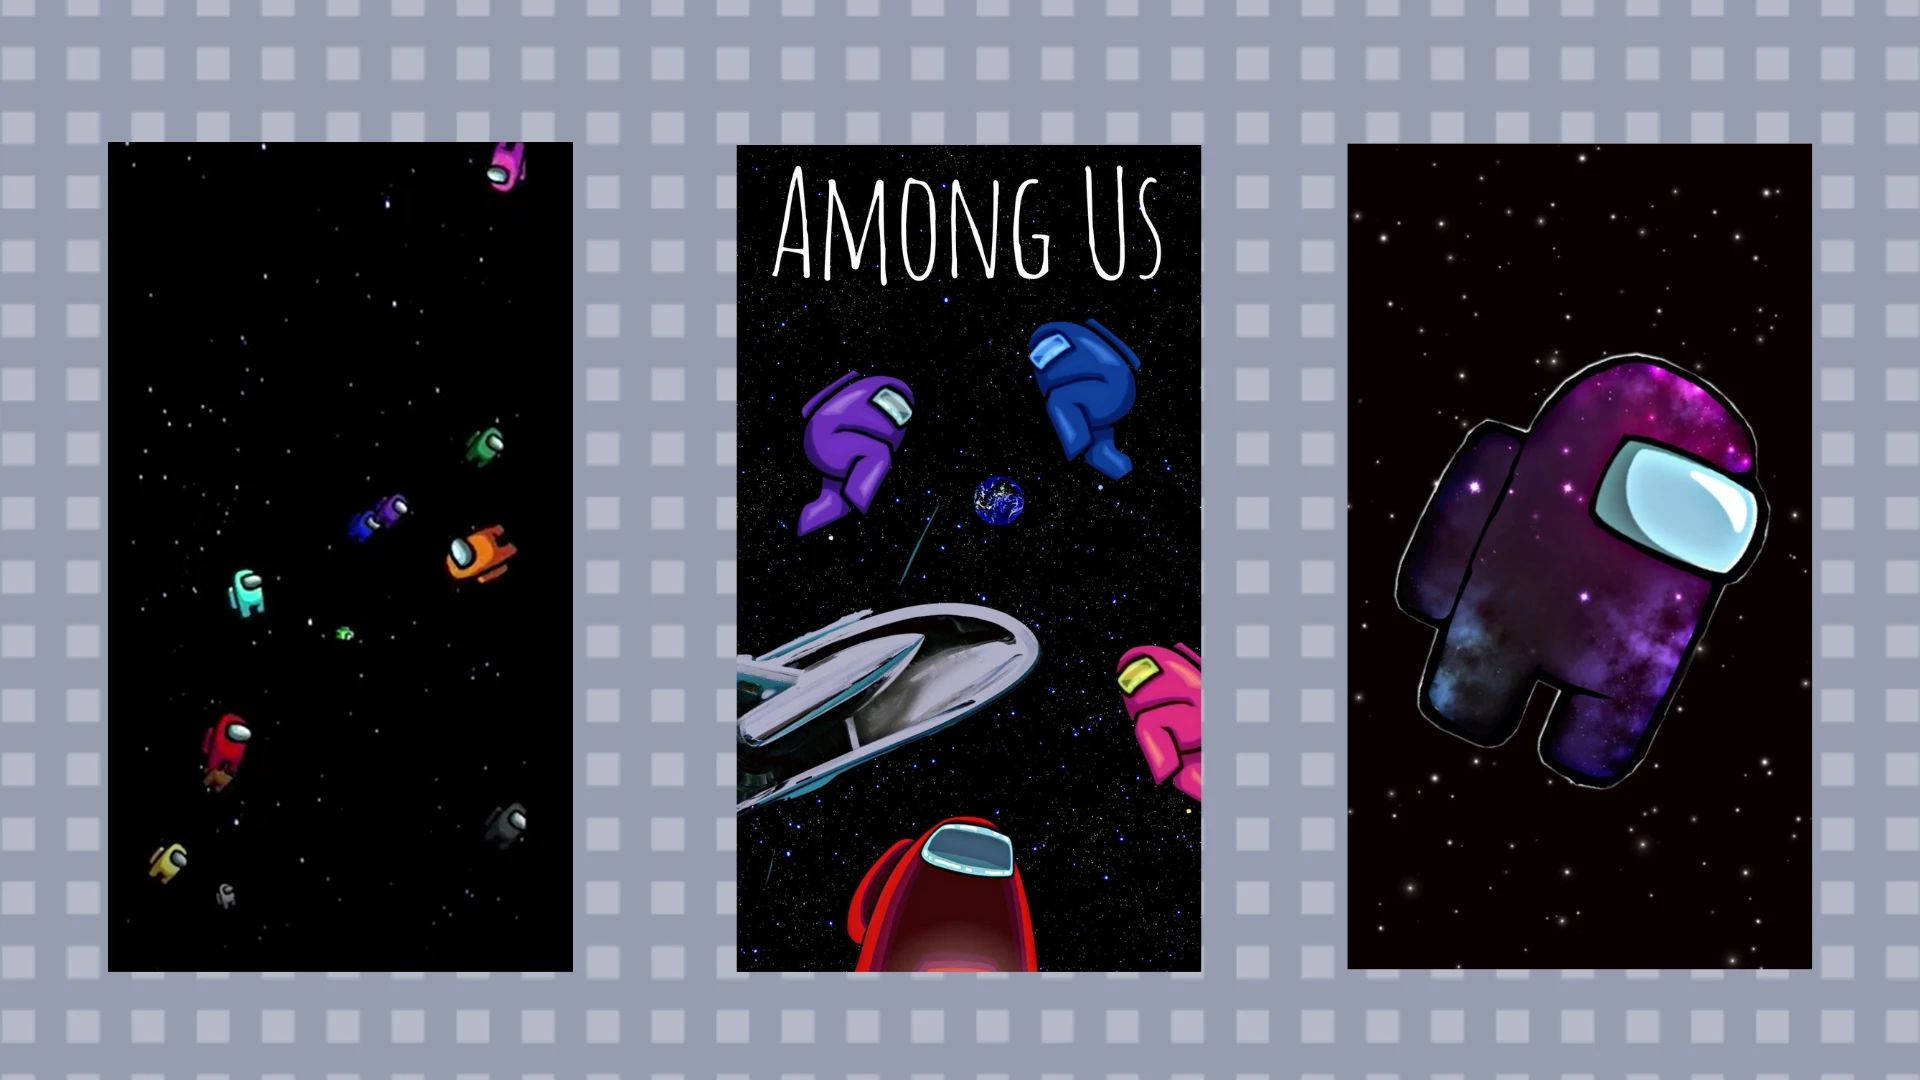 Among Us Game In Space Background